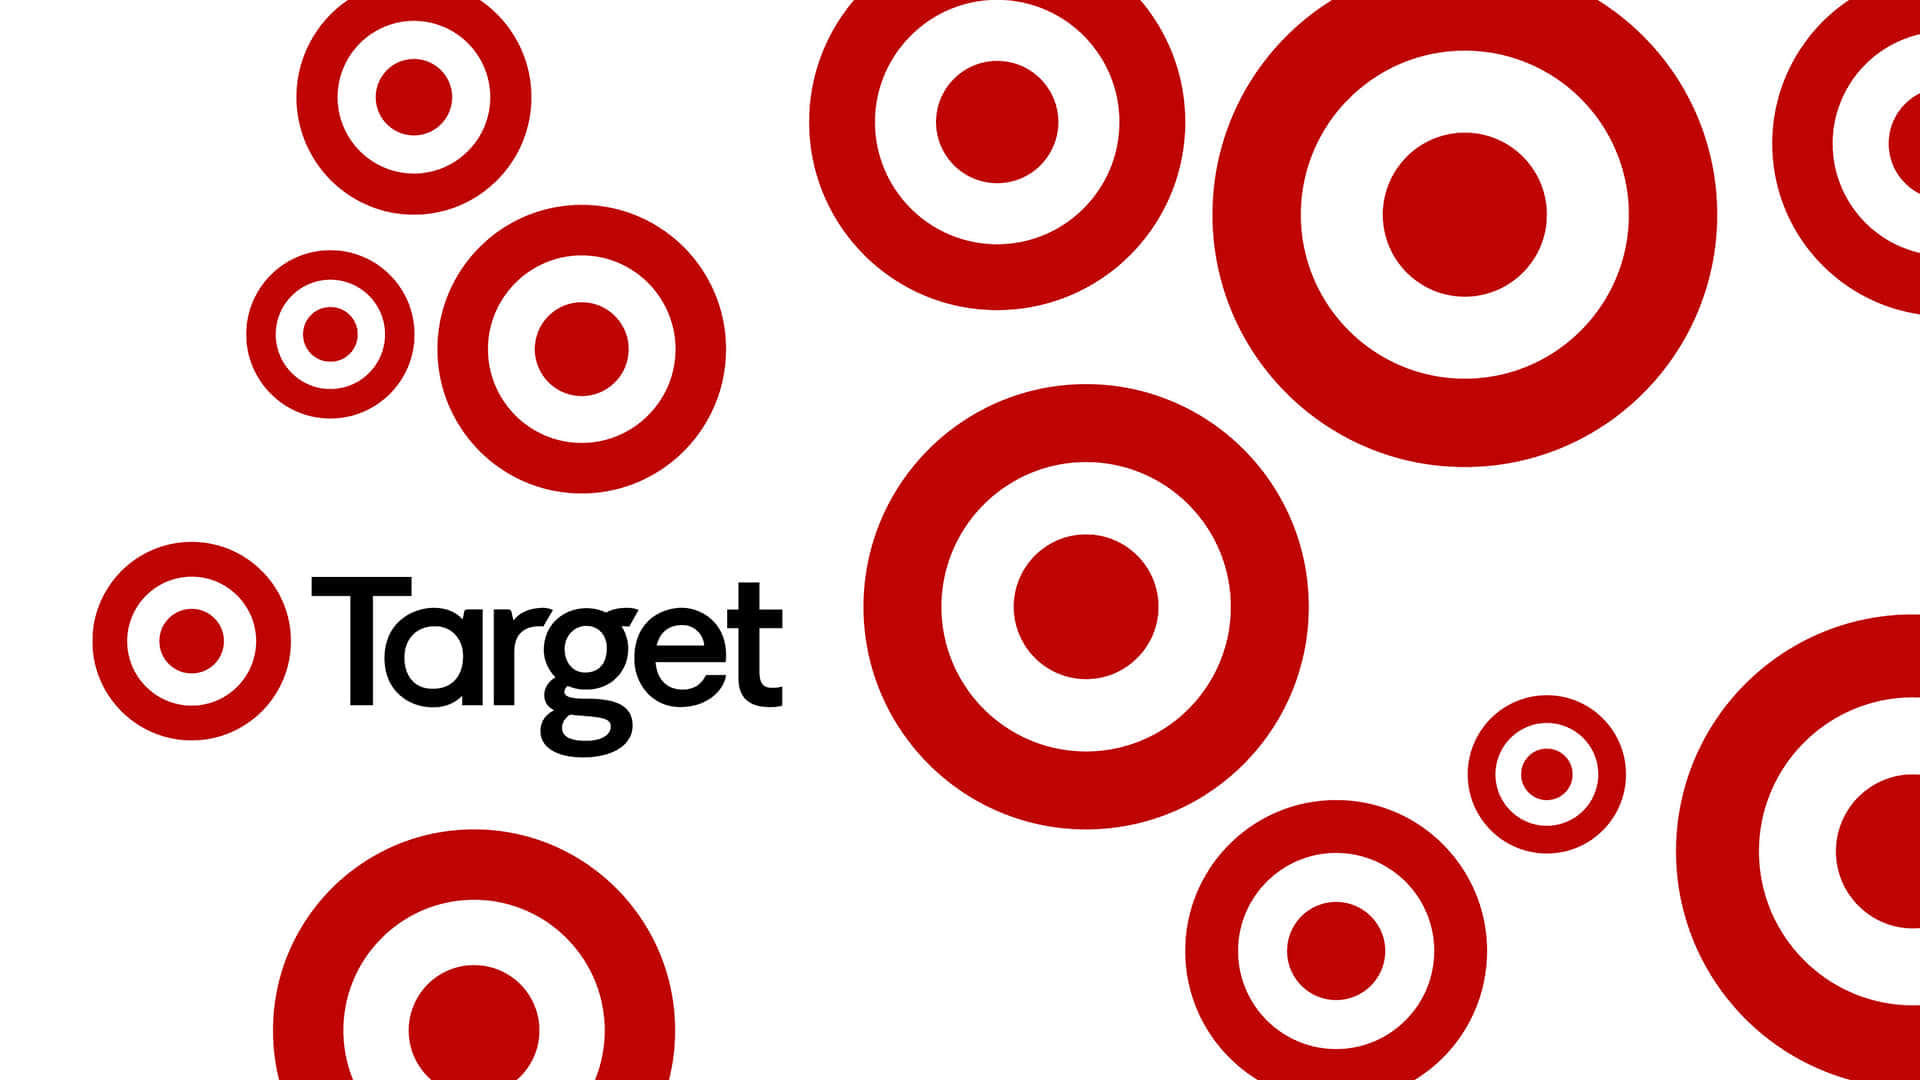 Target Logo With Red Circles On A White Background